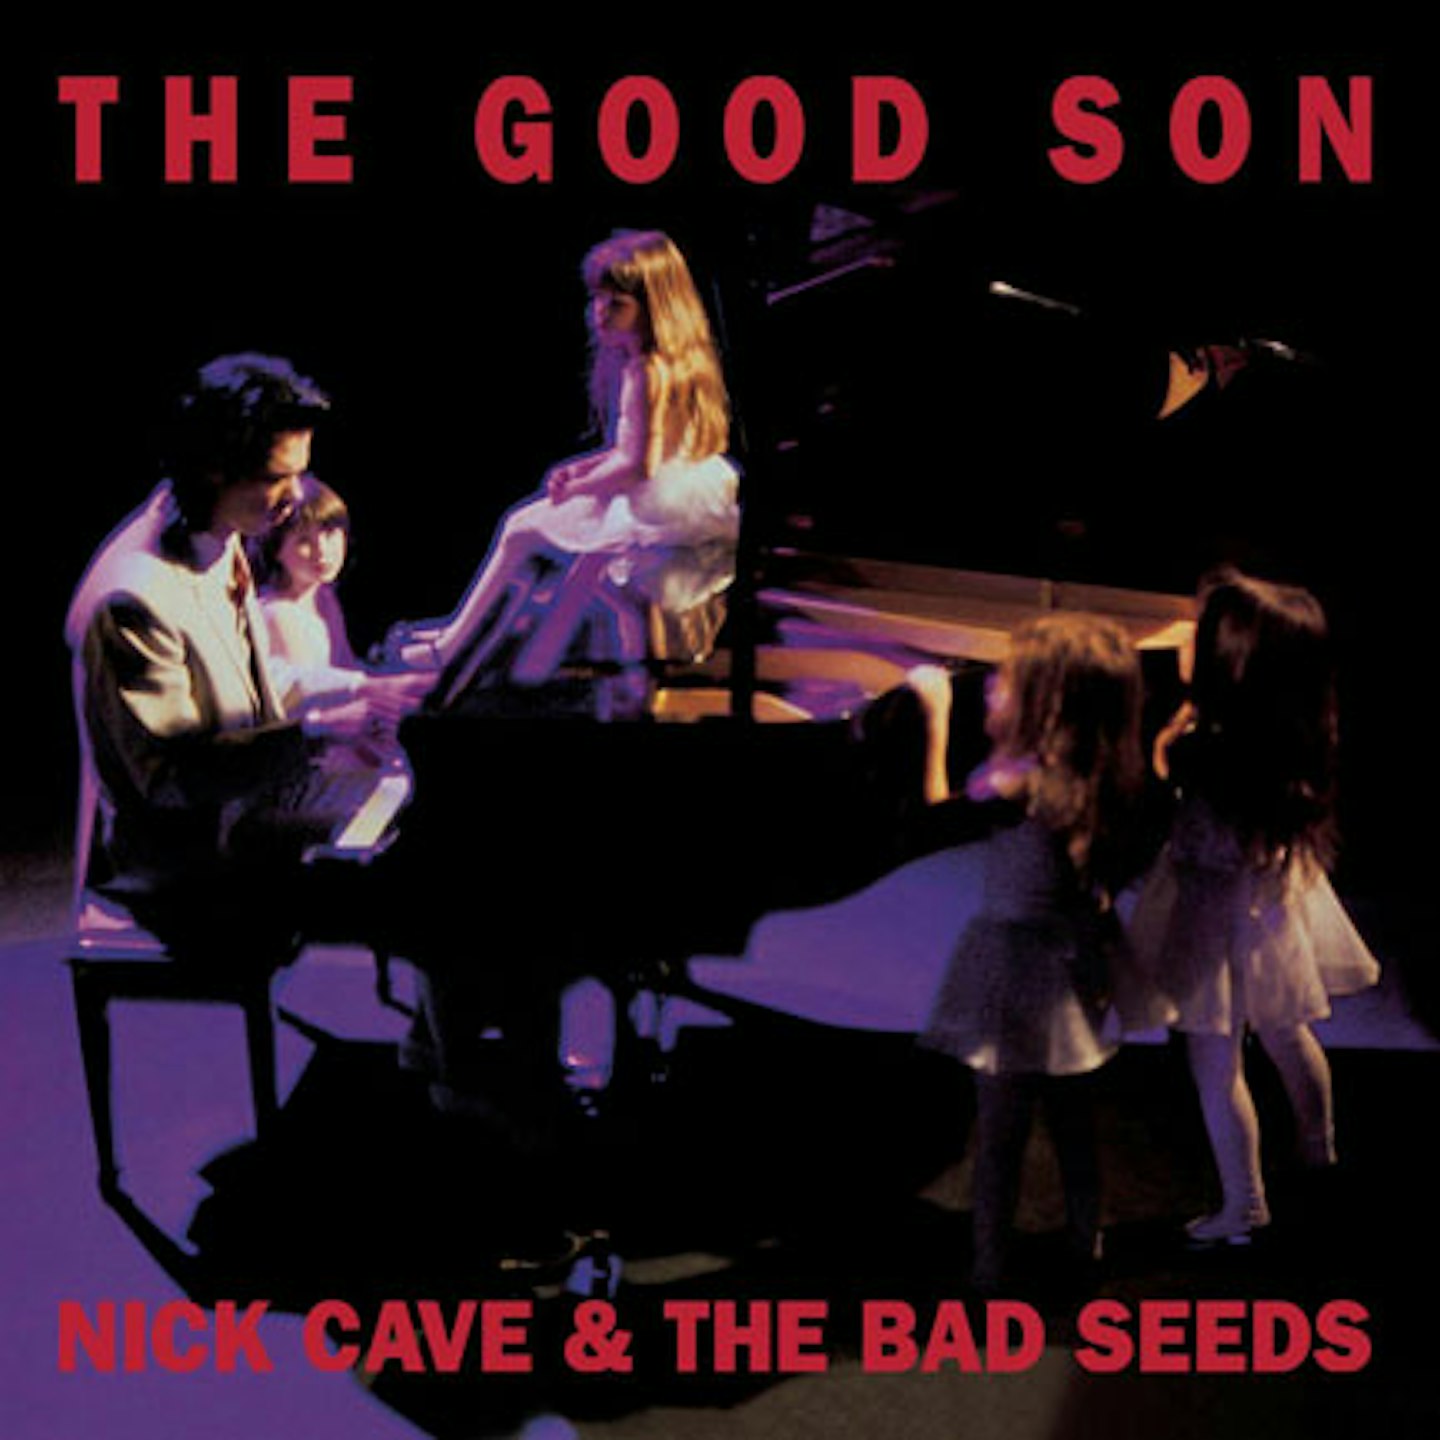 4. The Good Son - Nick Cave & The Bad Seeds